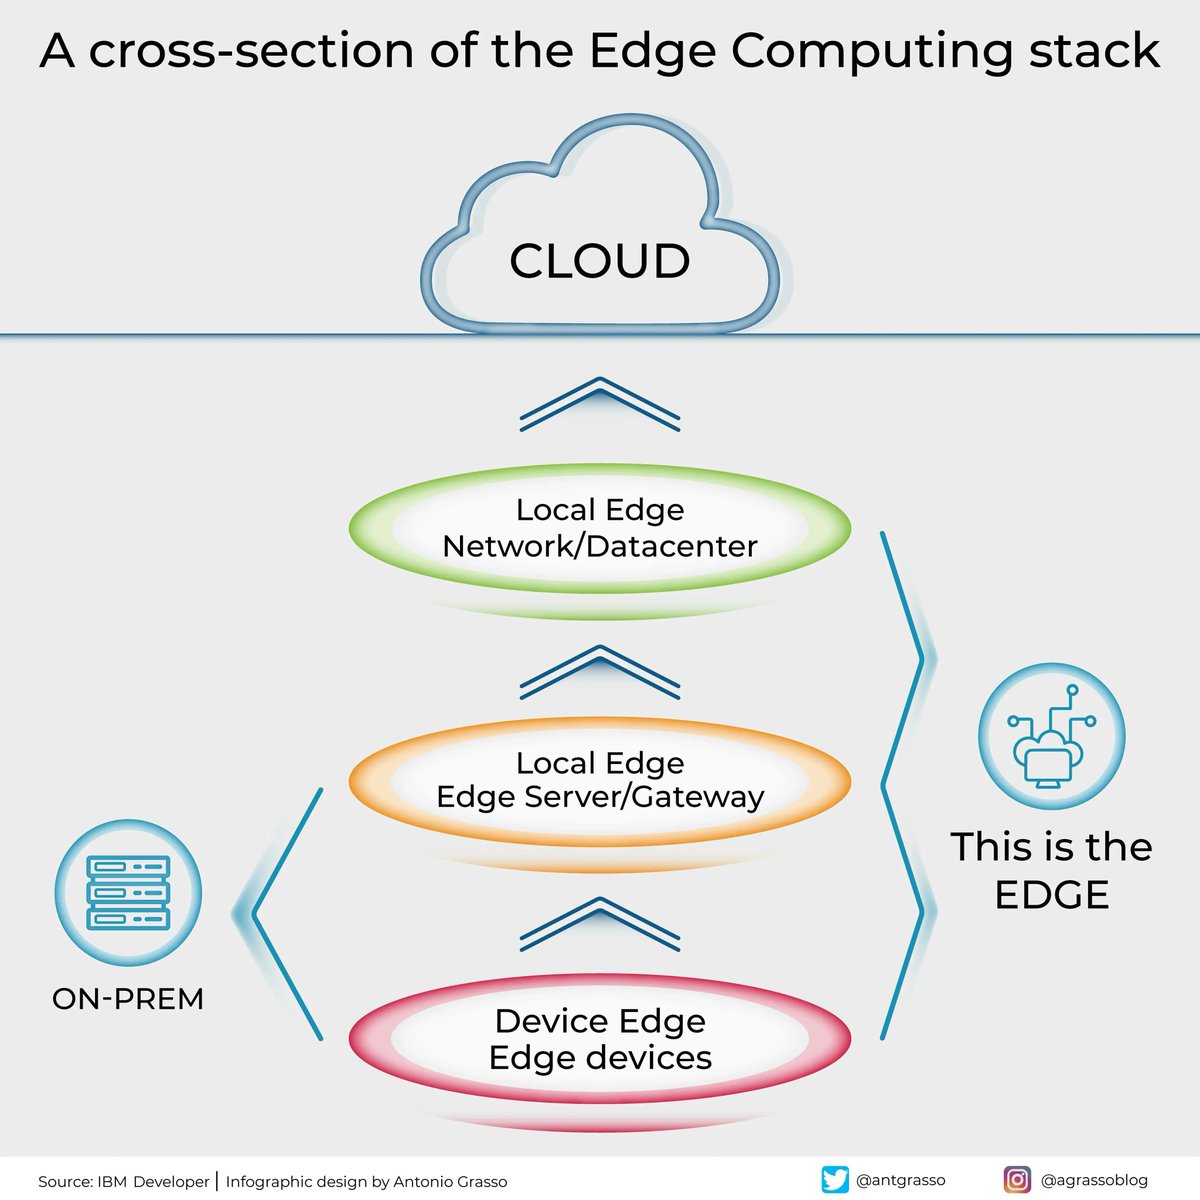 Edge Computing involves a hierarchical structure where data processing is performed closer to the data source, reducing reliance on central servers and minimizing latency. Microblog @antgrasso #EdgeComputing #IoT #IIoT